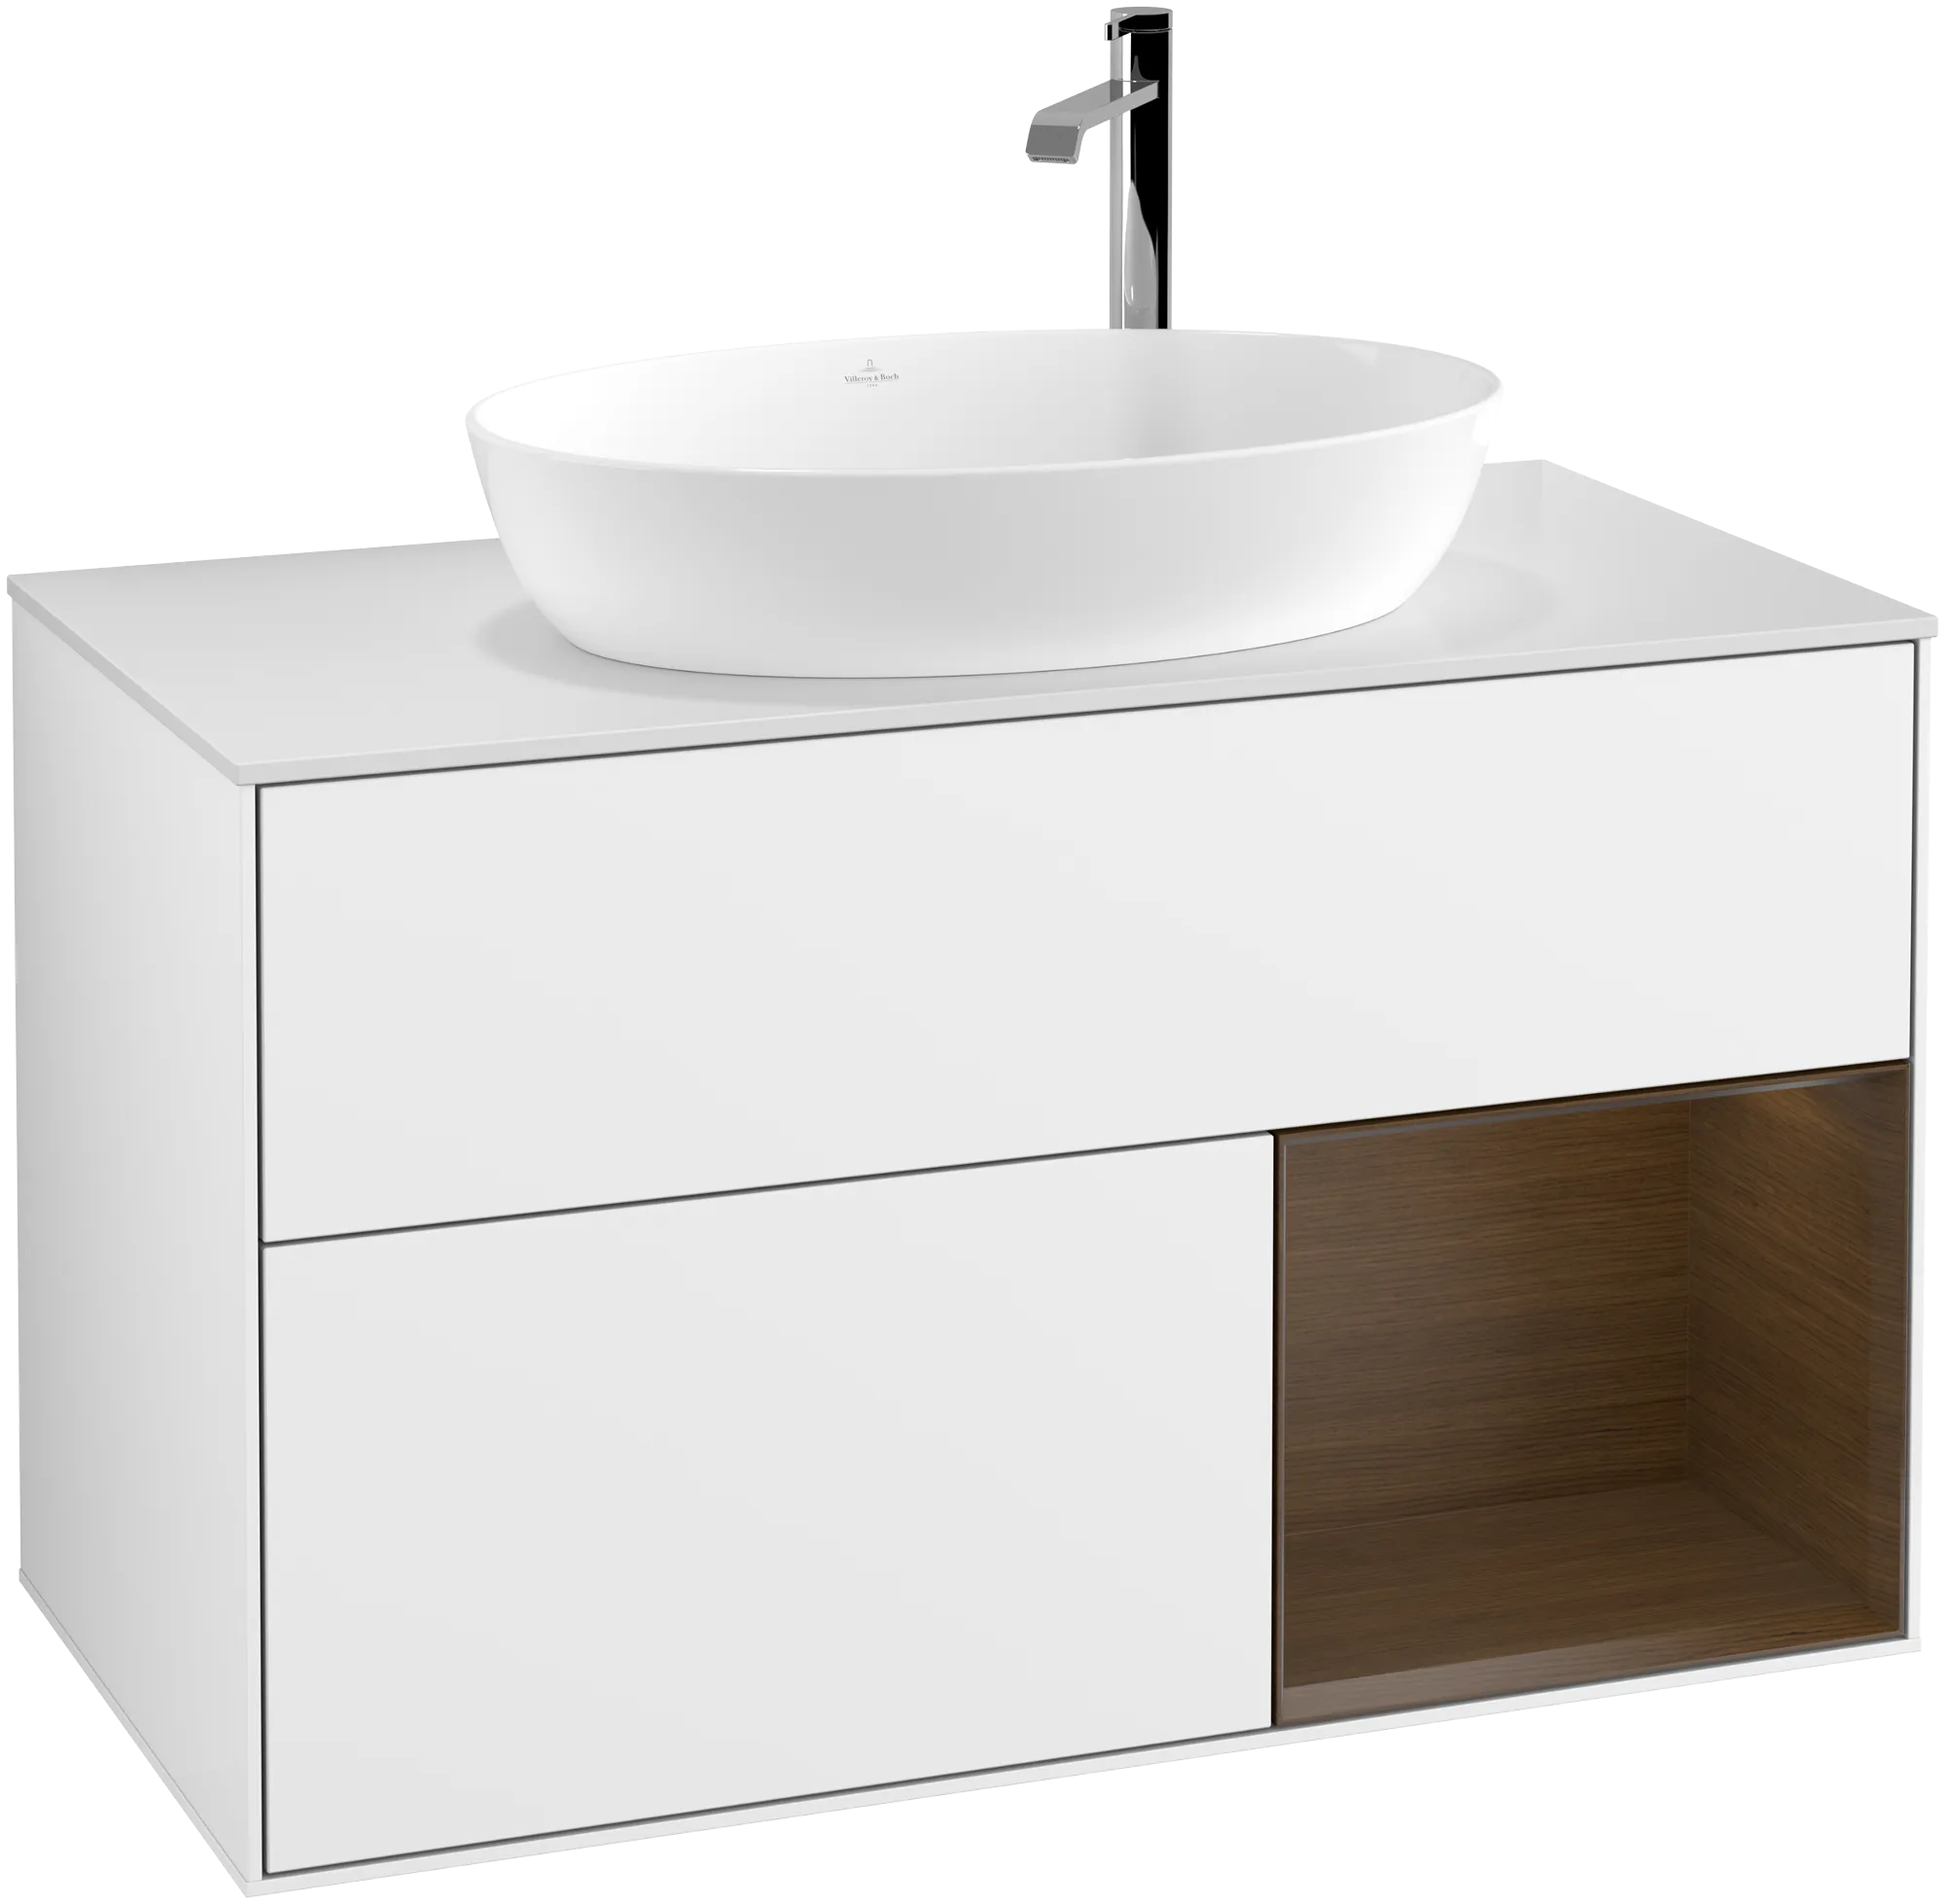 Obrázek VILLEROY BOCH Finion Vanity unit, with lighting, 2 pull-out compartments, 1000 x 603 x 501 mm, Glossy White Lacquer / Walnut Veneer / Glass White Matt #G901GNGF